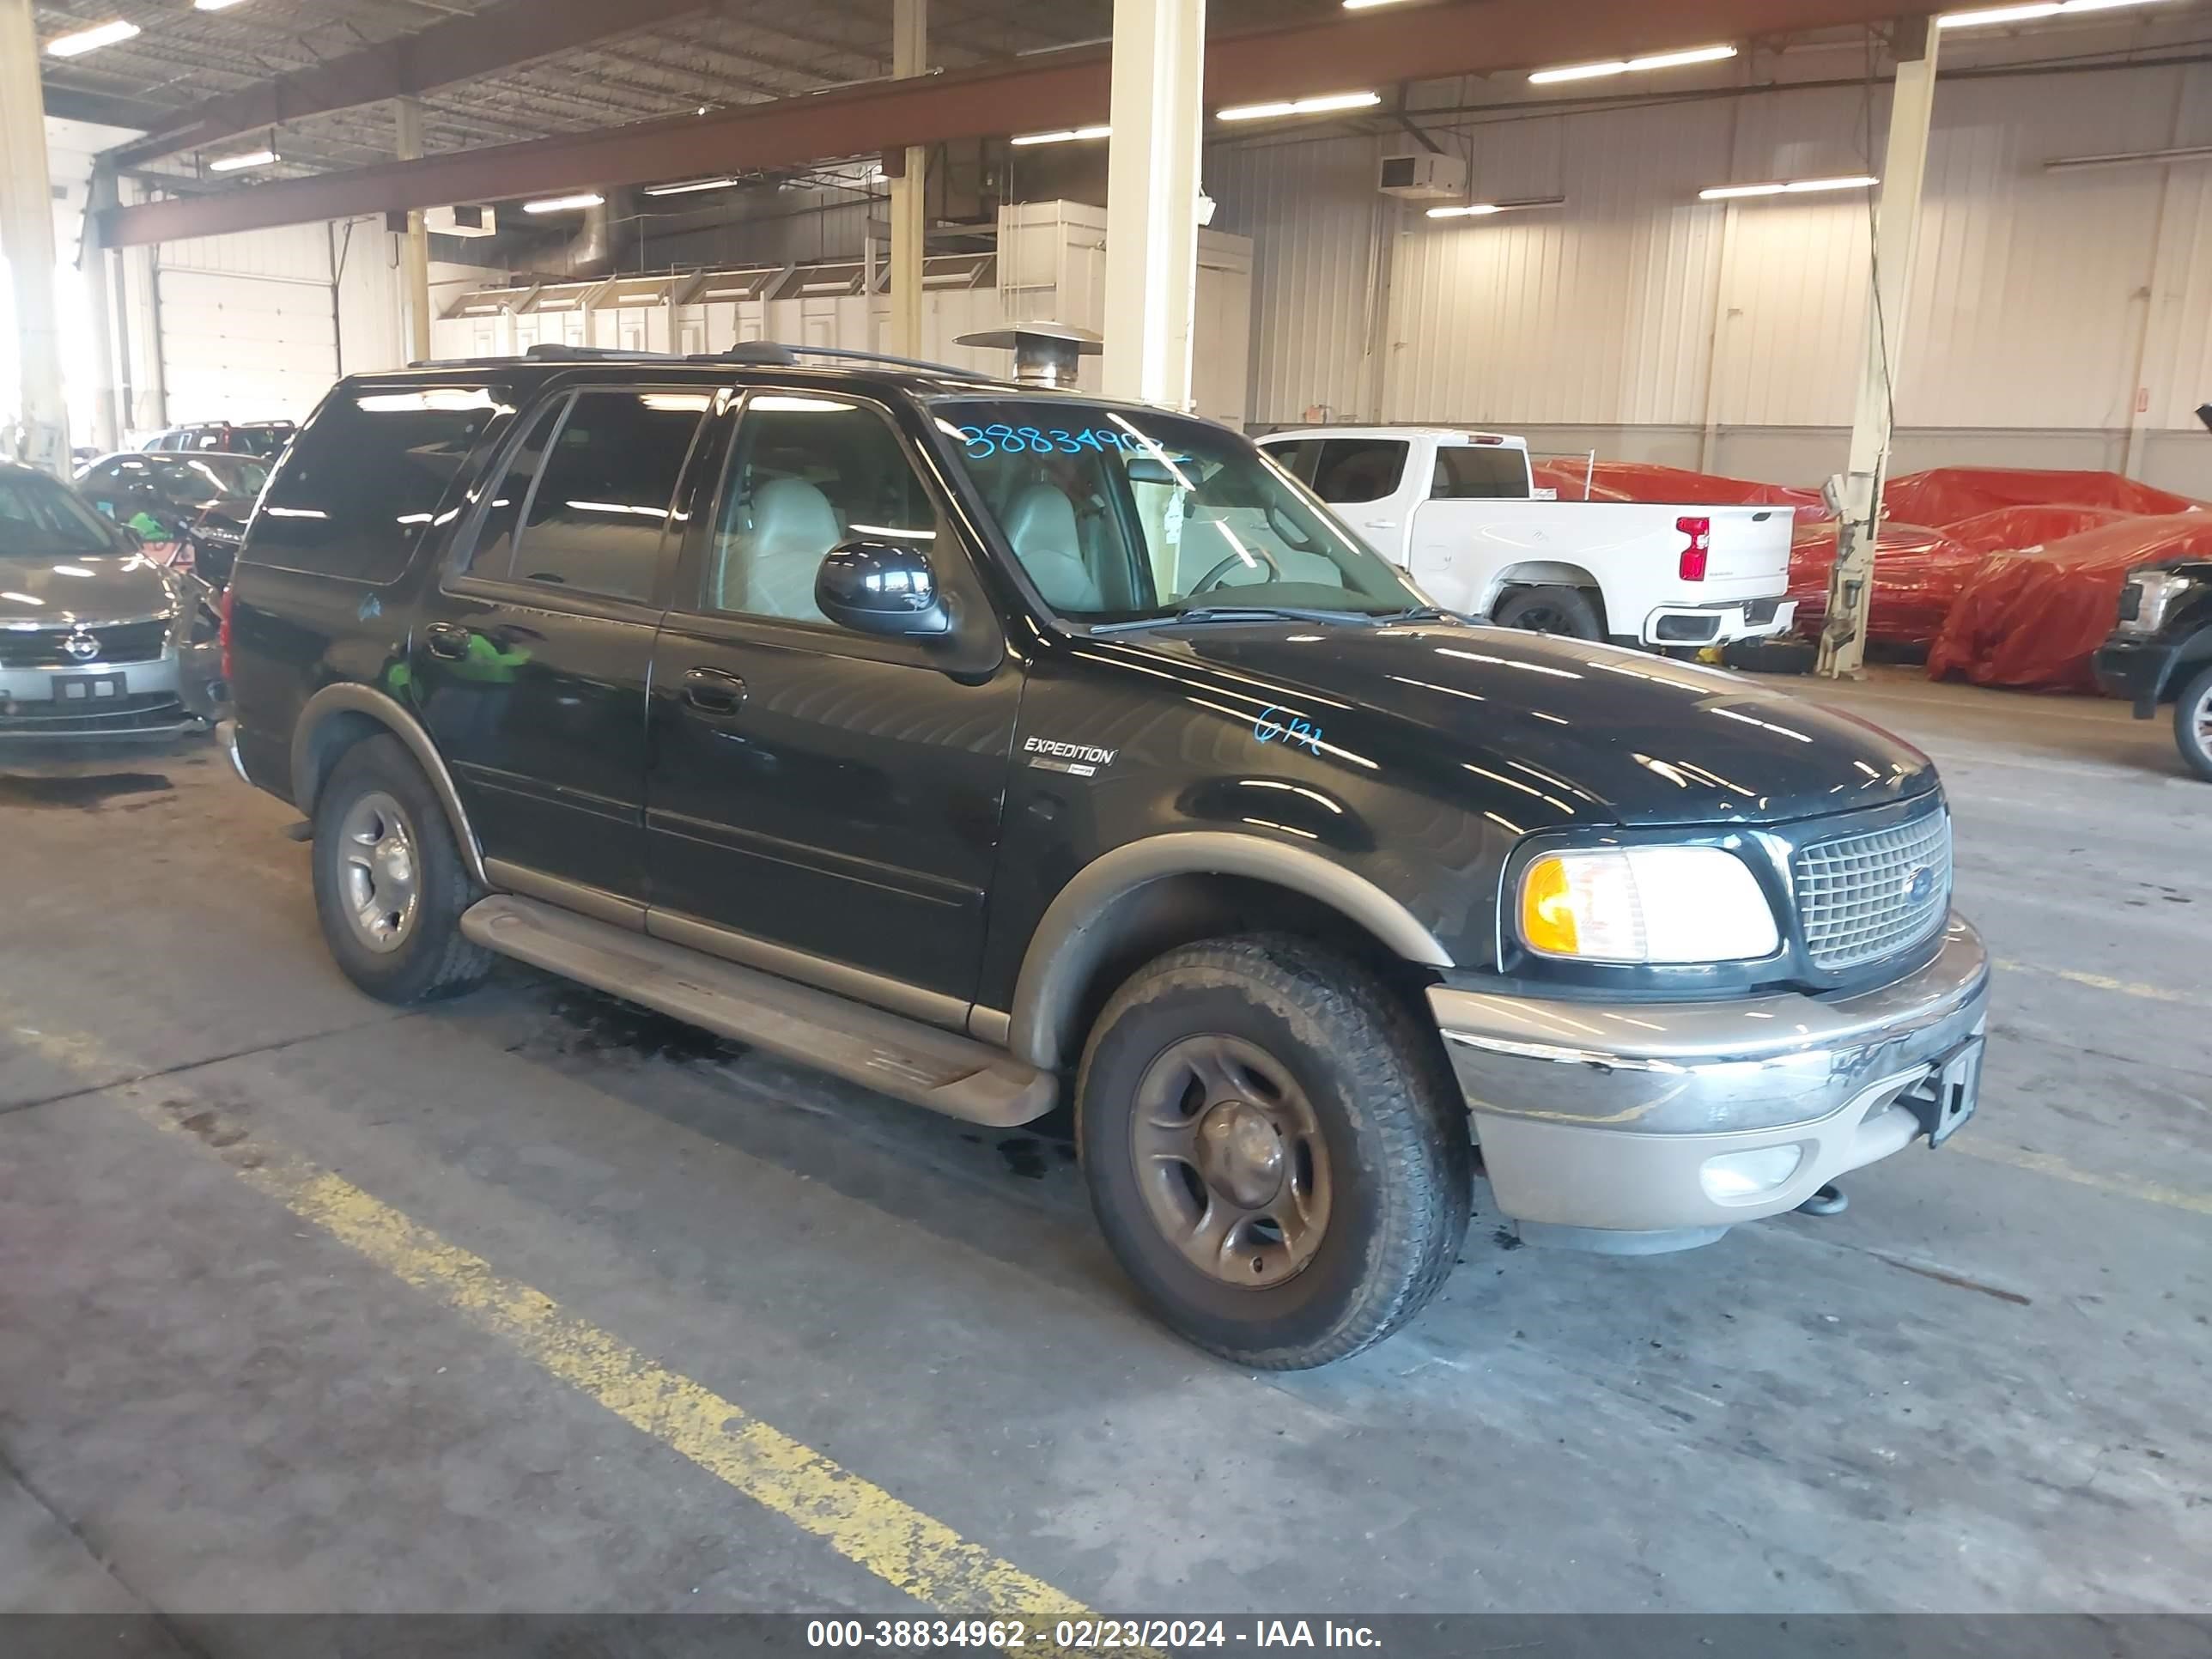 VIN: 1FMPU18LXYLA41359 - ford expedition